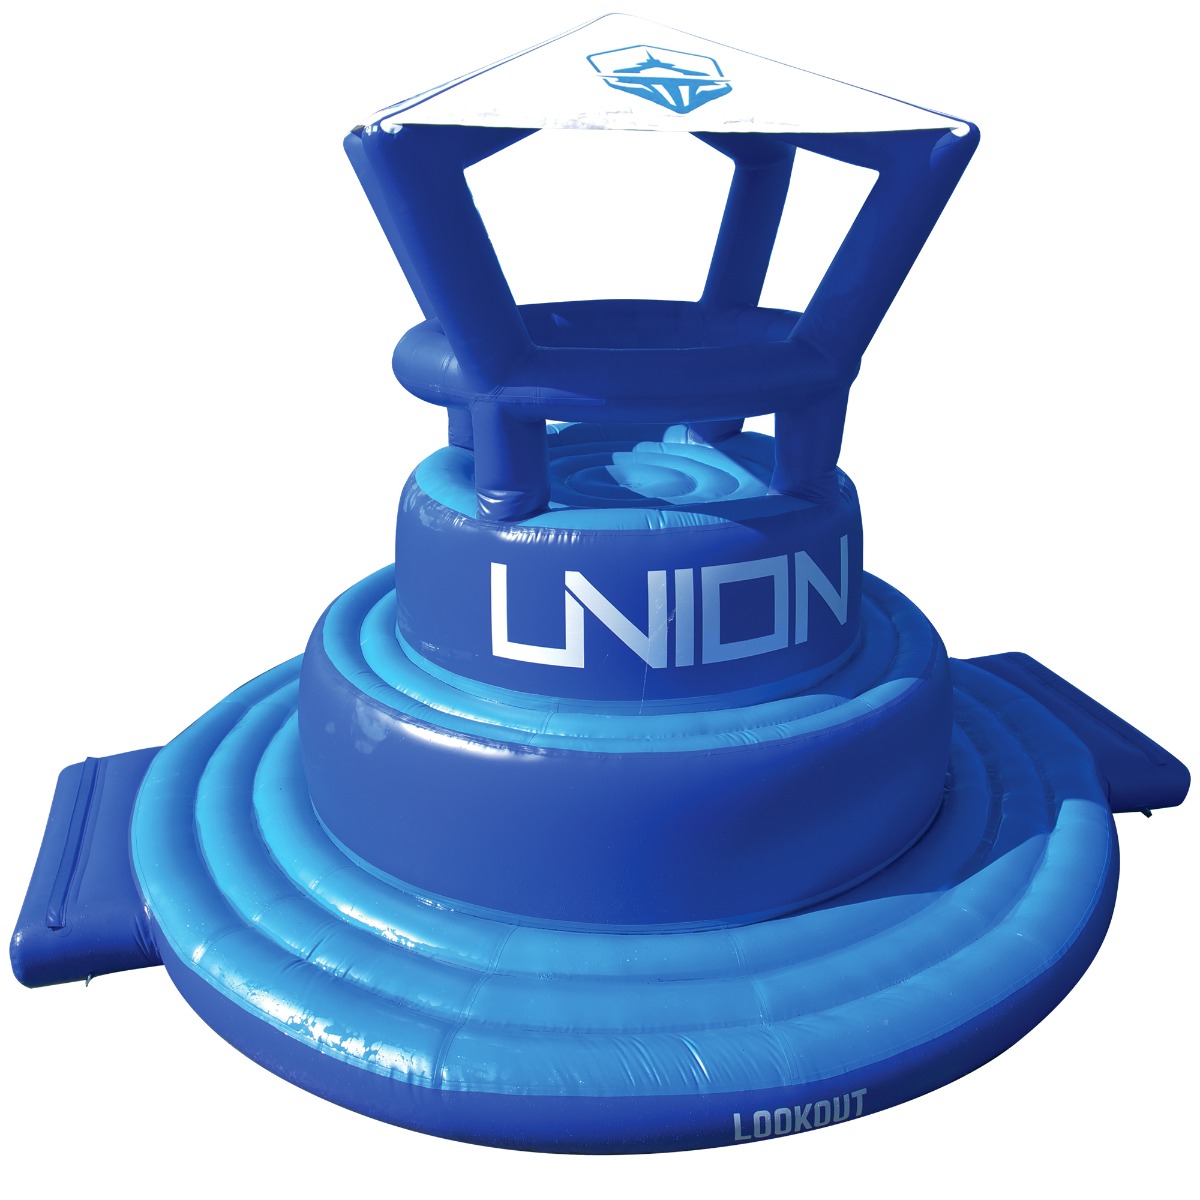 User Manual: Union Aquaparks Lookout Tower